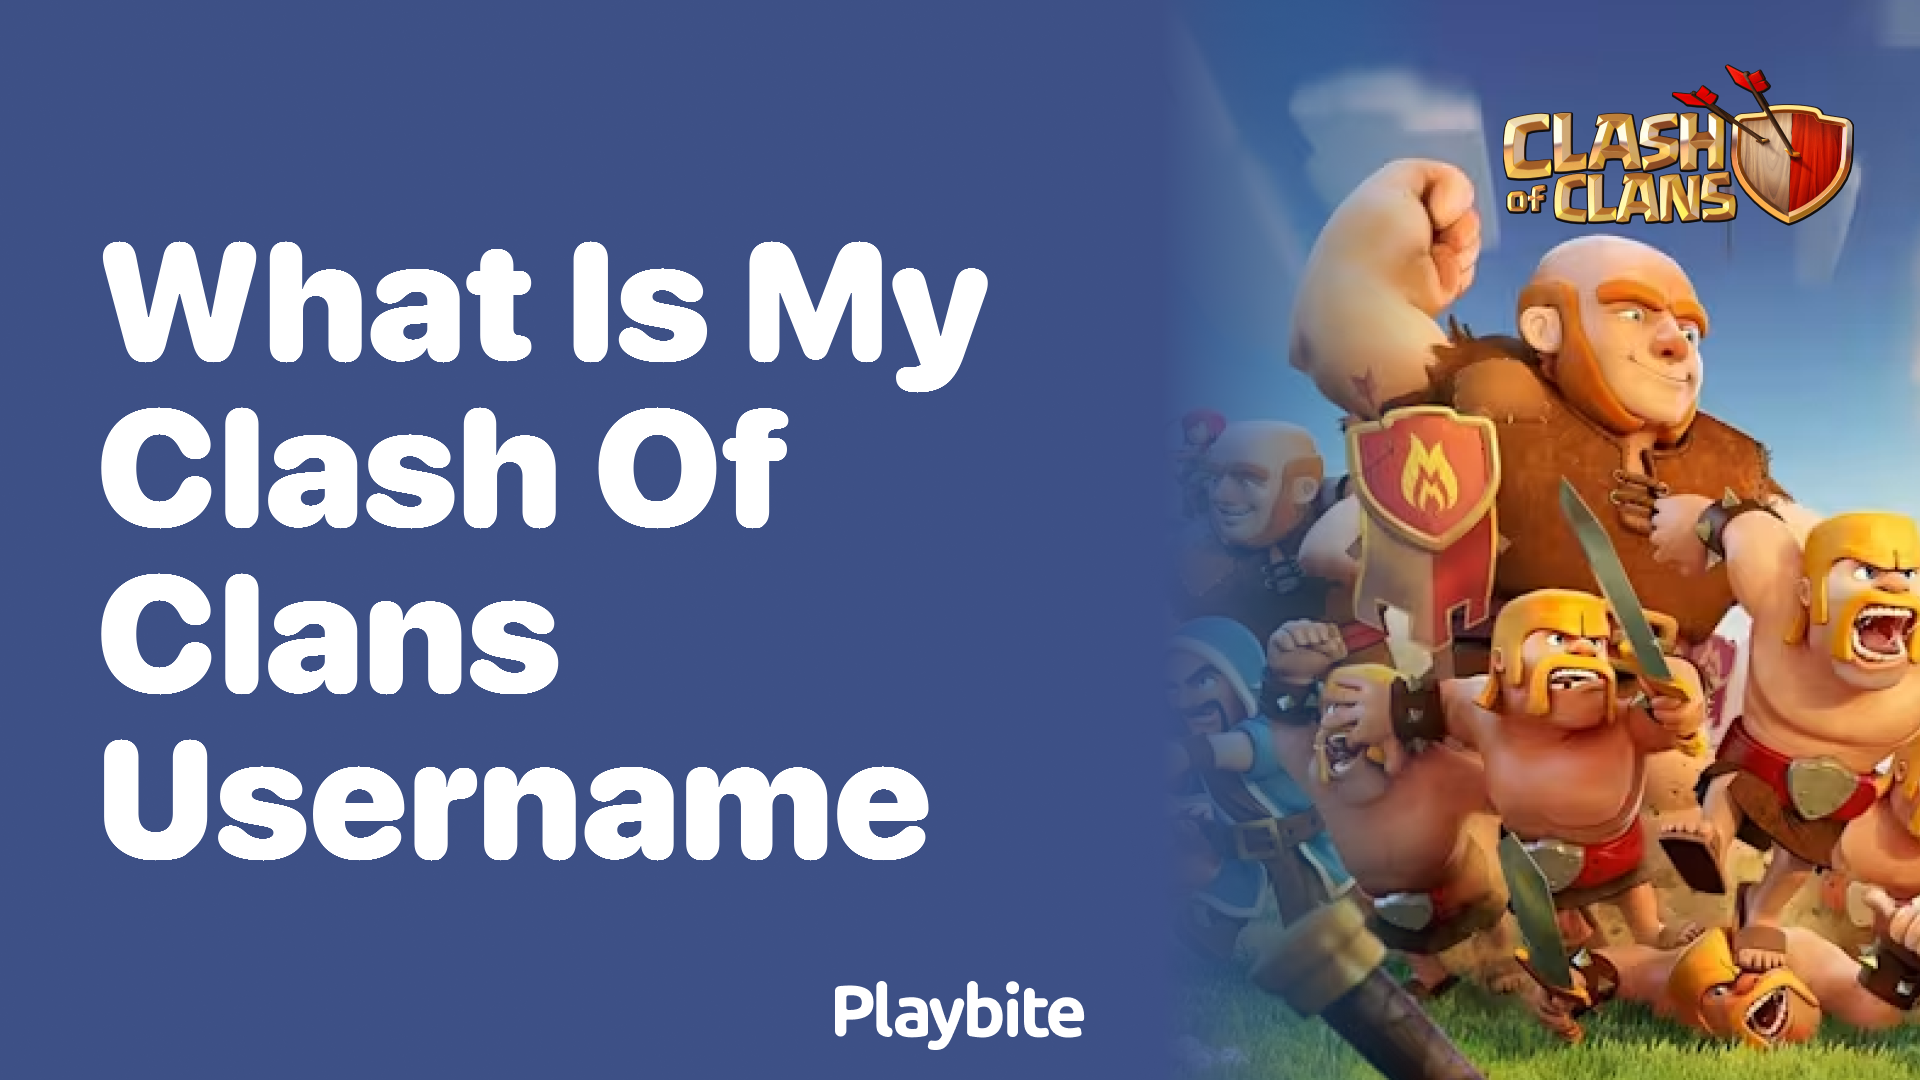 What Is My Clash of Clans Username?